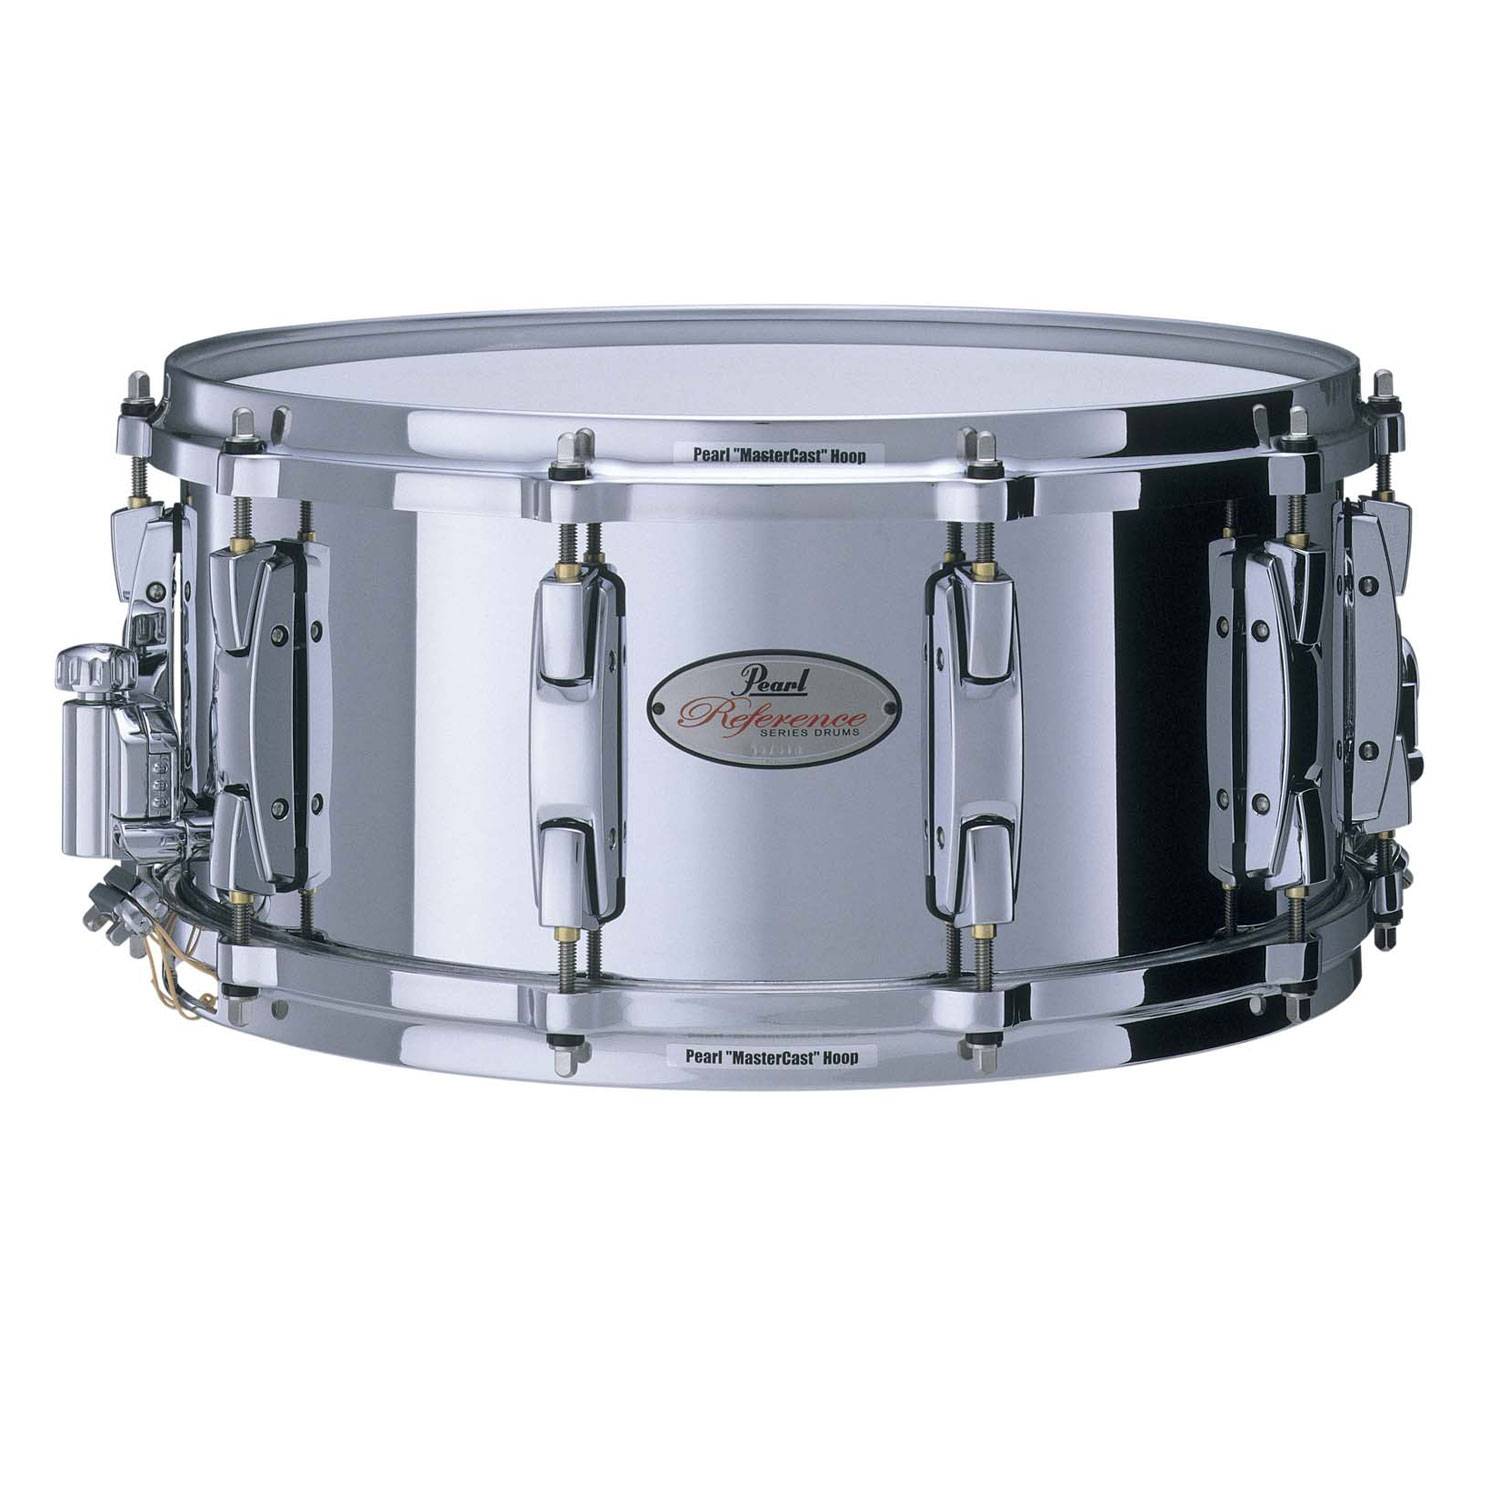 Pearl RFS1465 Reference Steel Snare